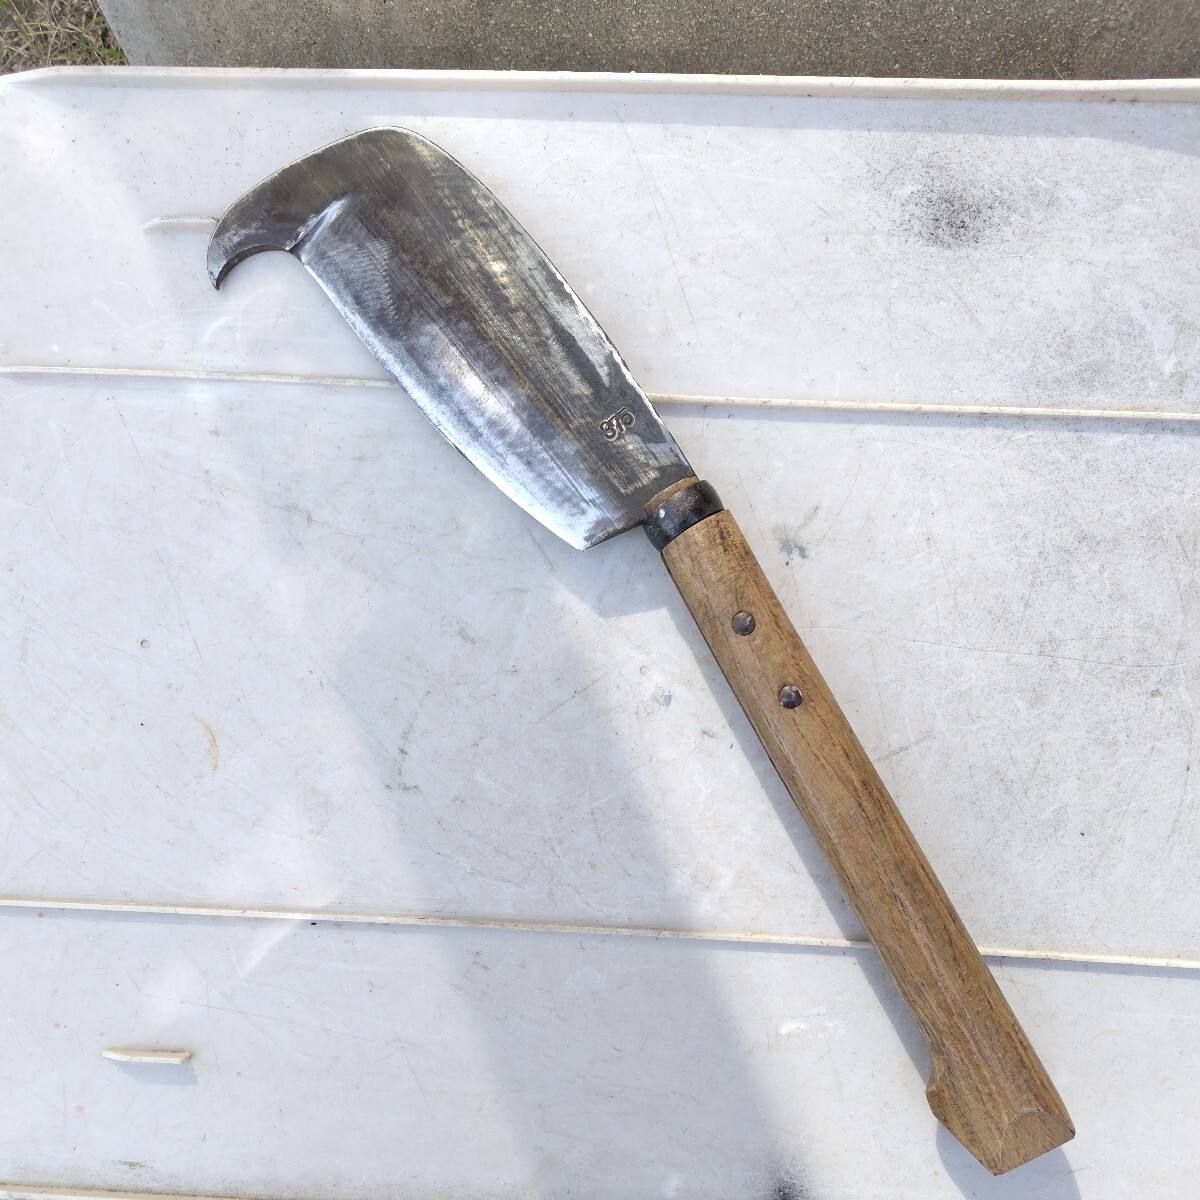  small of the back hatchet branch strike . for mountain . mountain work outdoor ( both blade ) ( used )